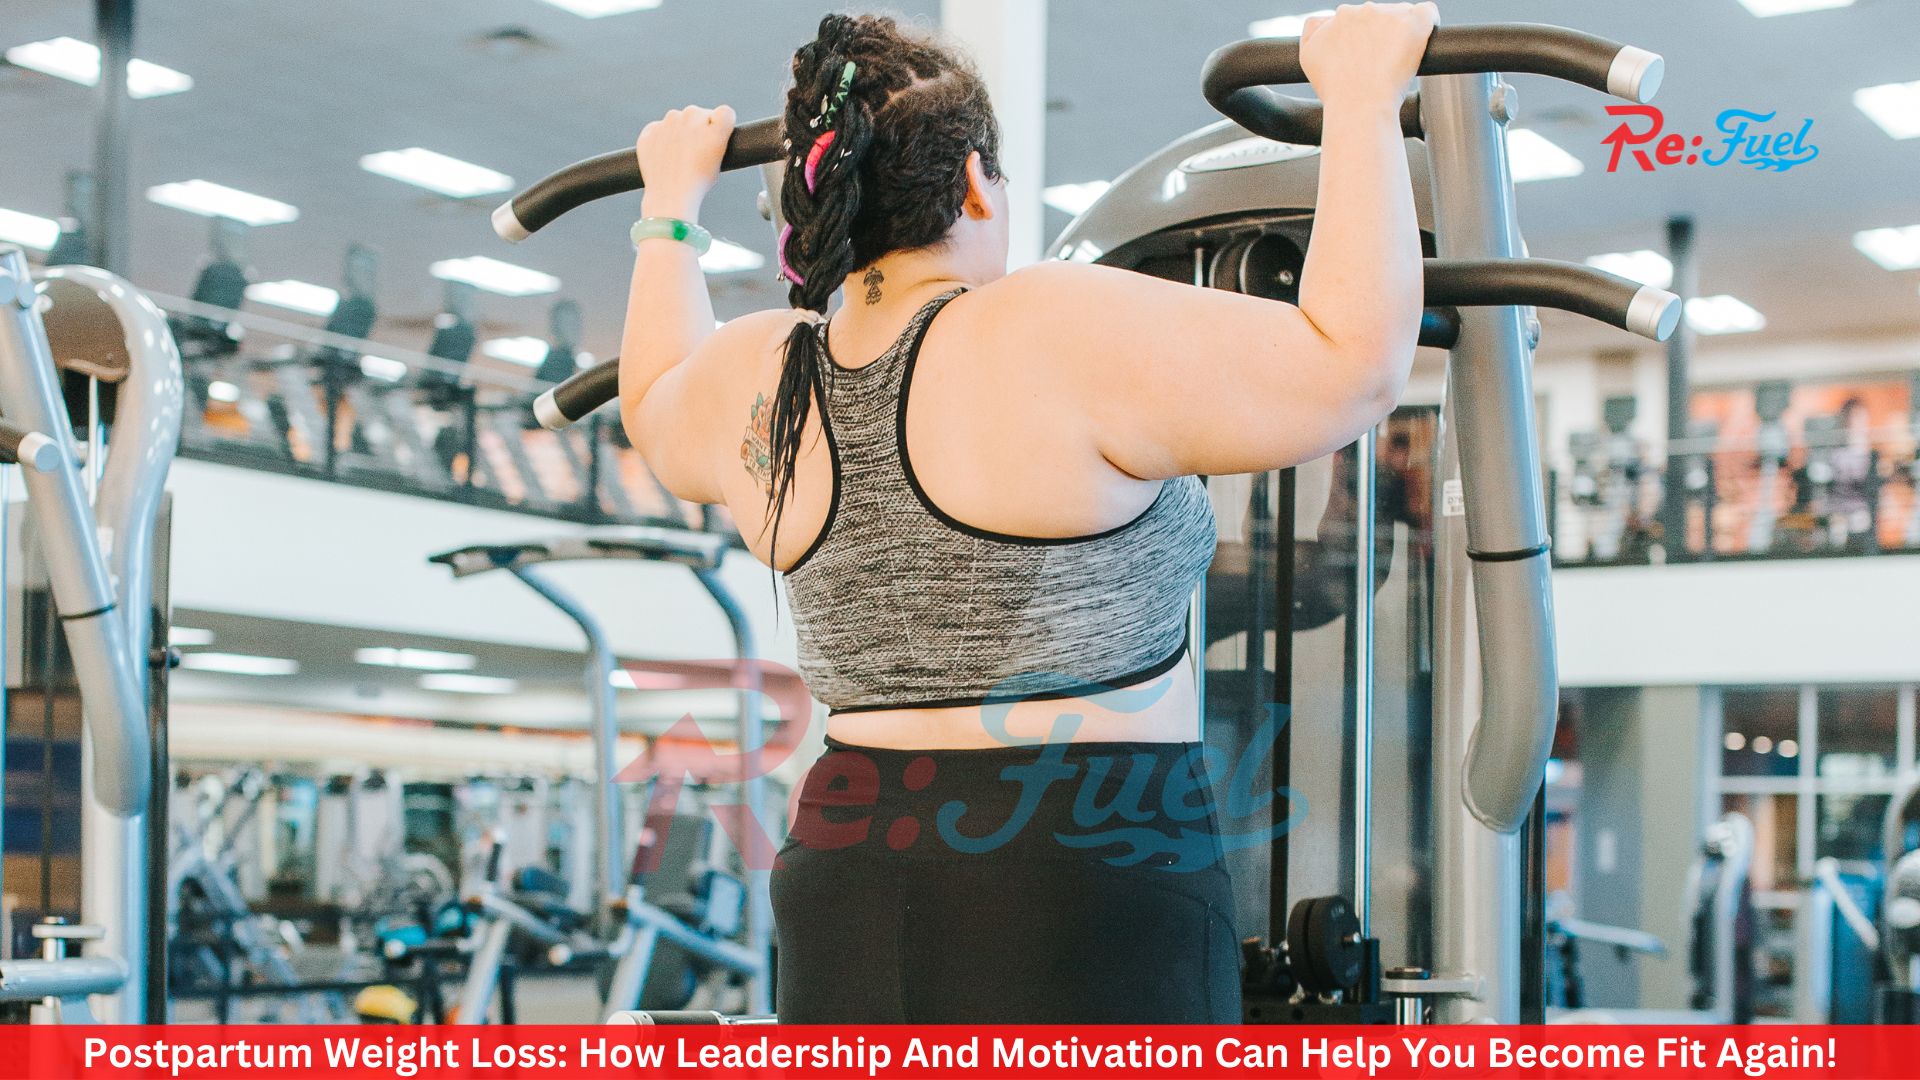 Postpartum Weight Loss: How Leadership And Motivation Can Help You Become Fit Again!